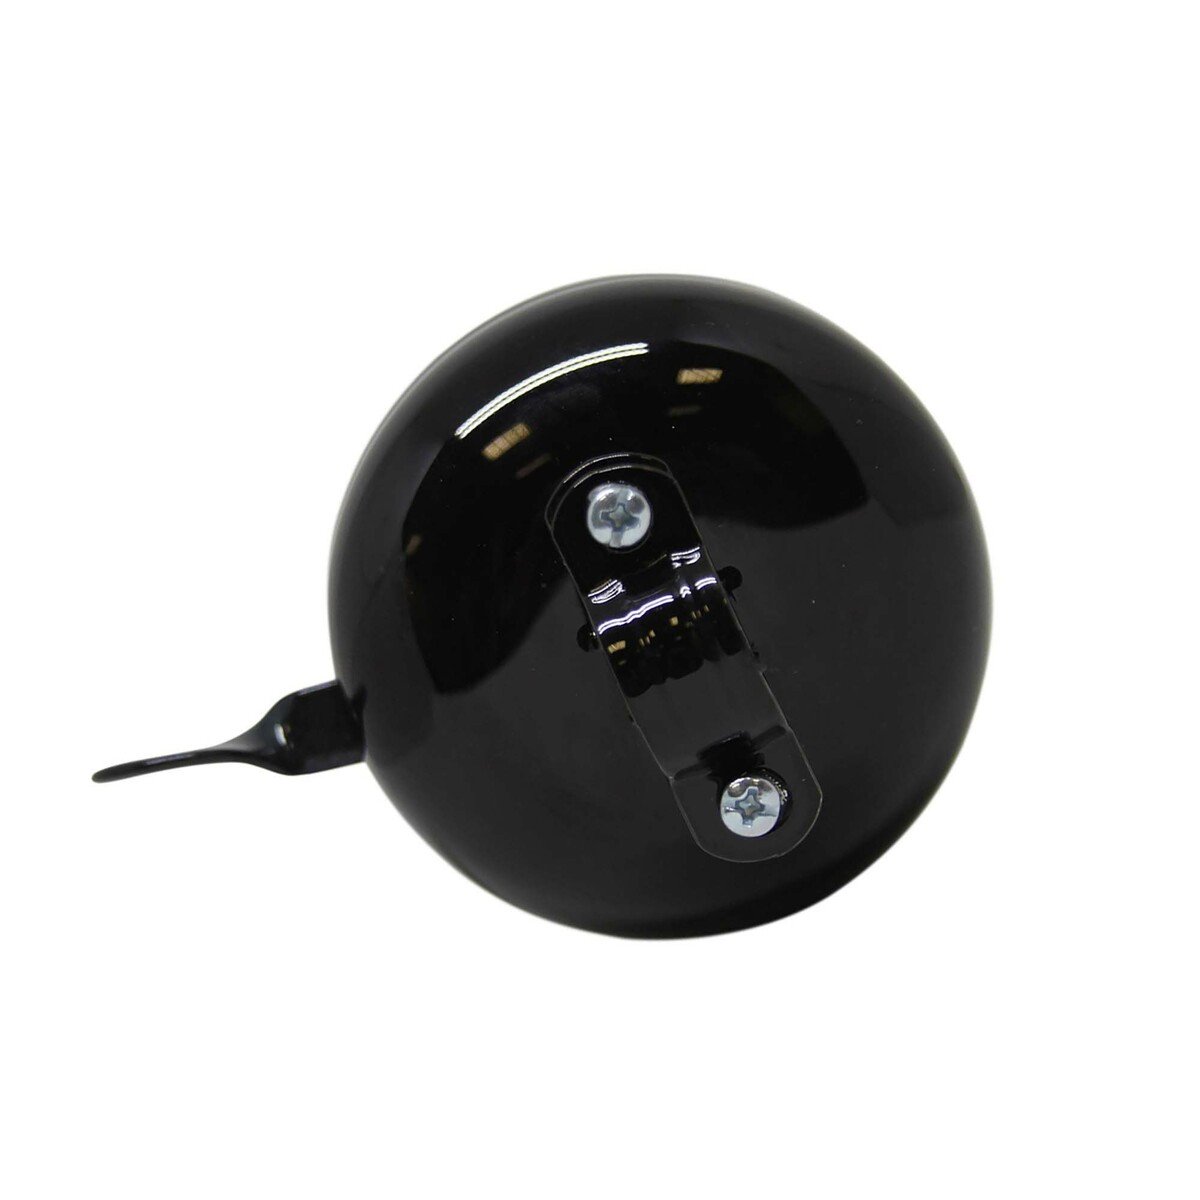 Spartan I Love My Bike Bell For Bicycle, Black, SP-9030